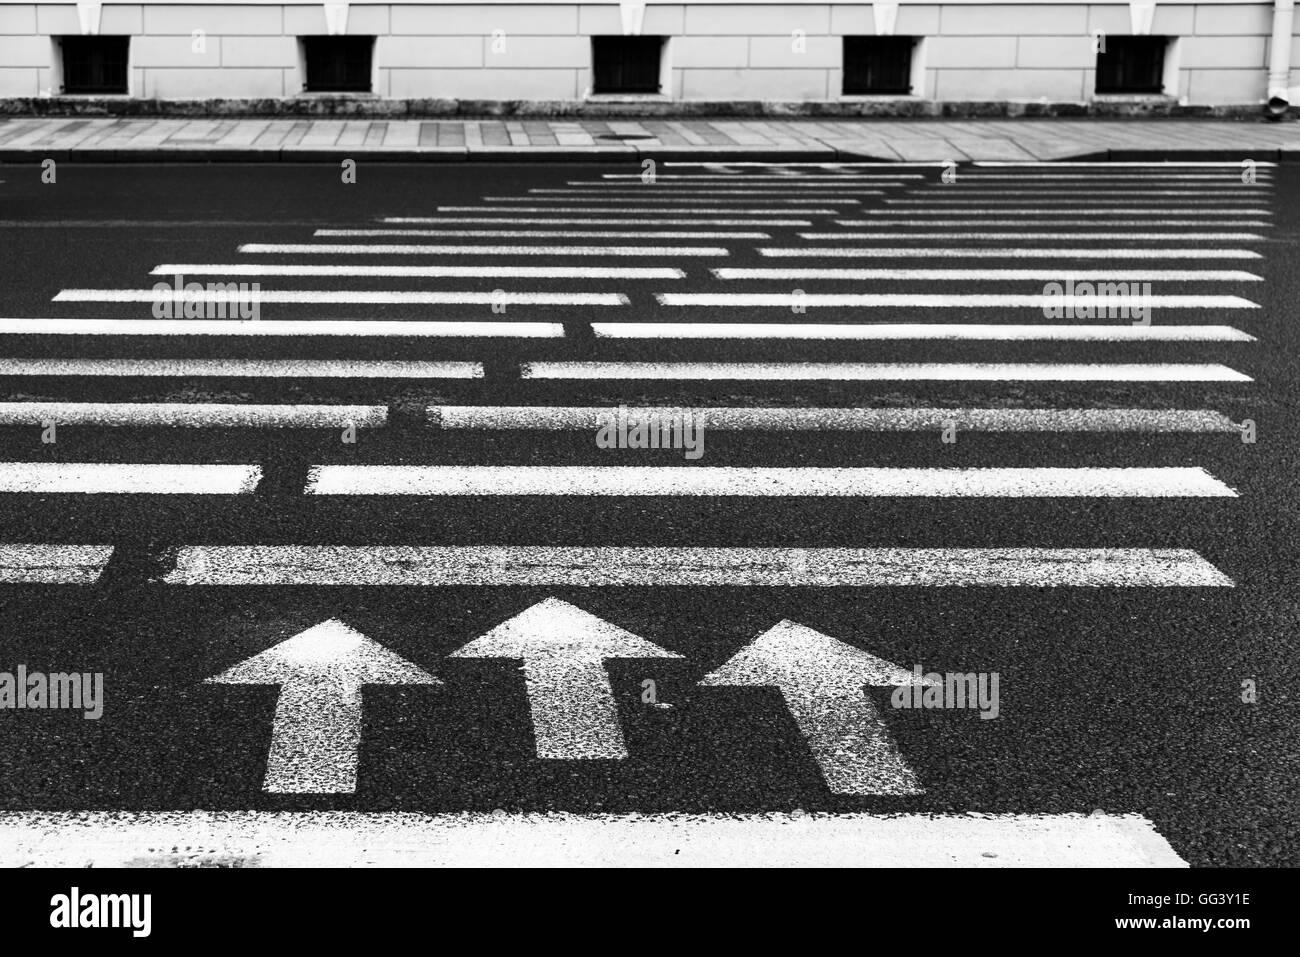 Pedestrian crossing with road marking: white arrows and rectangles on dark asphalt Stock Photo